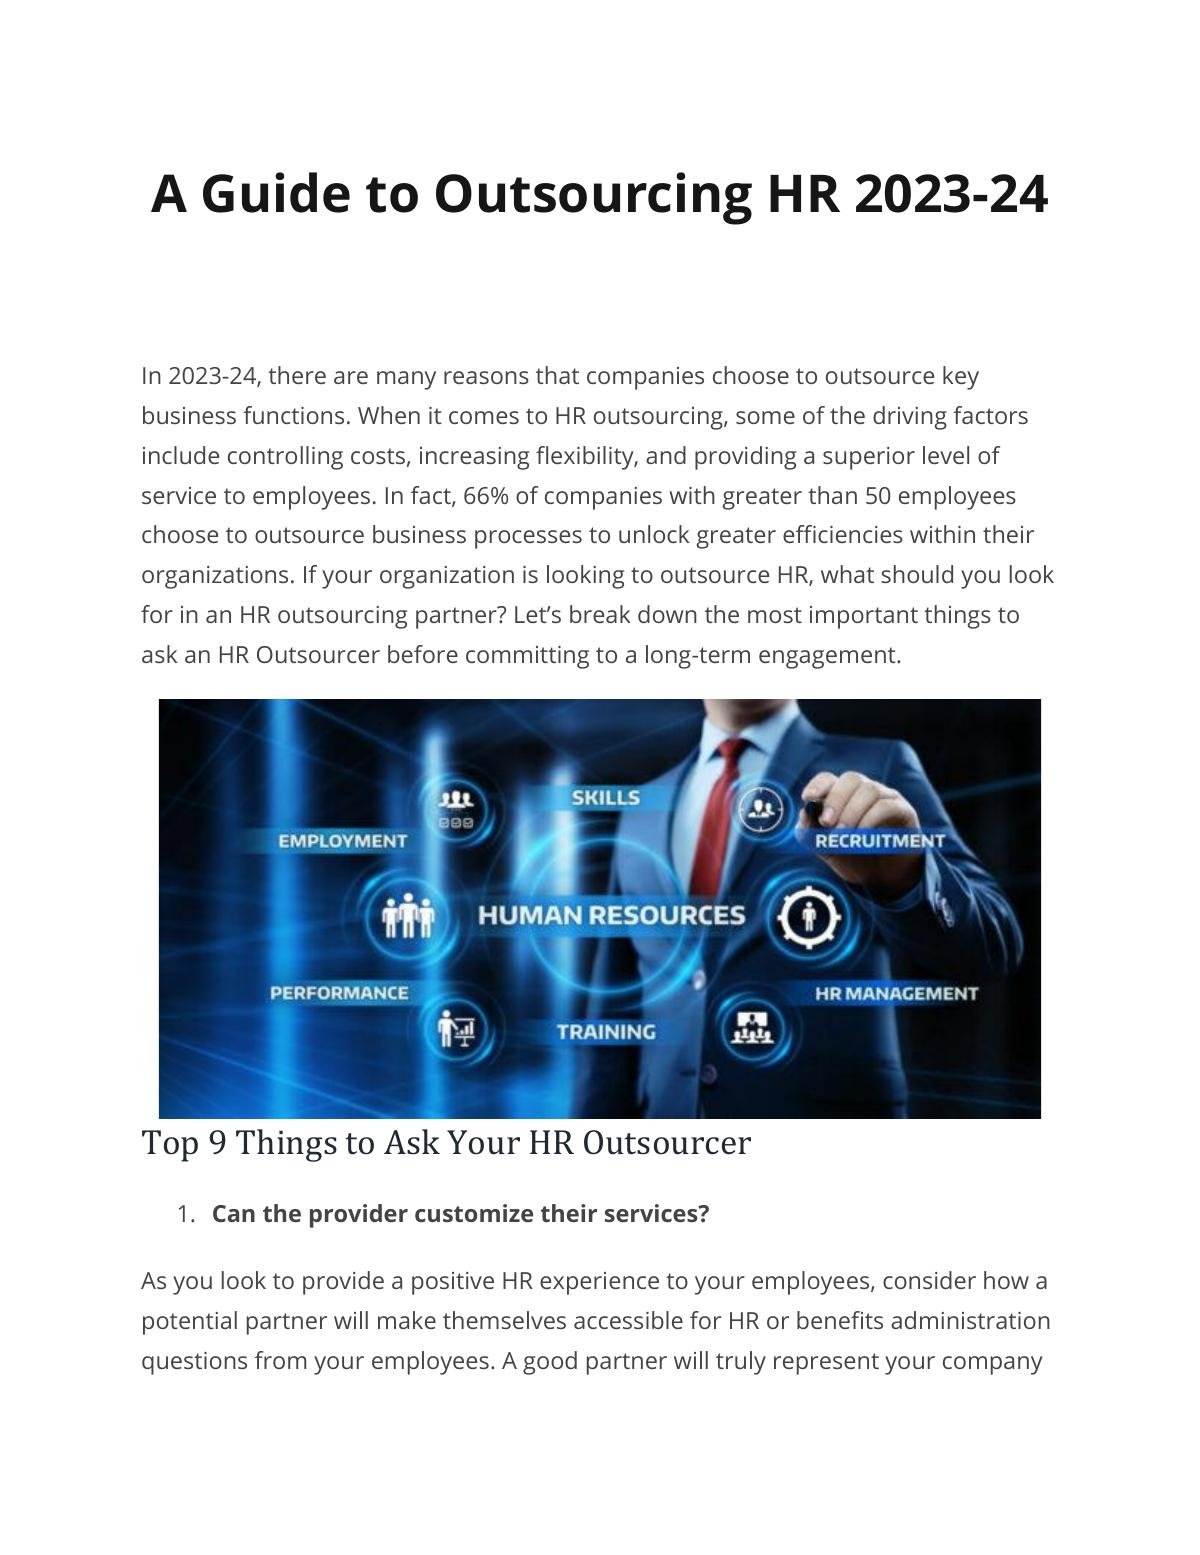 A Guide to Outsourcing HR 2023-24